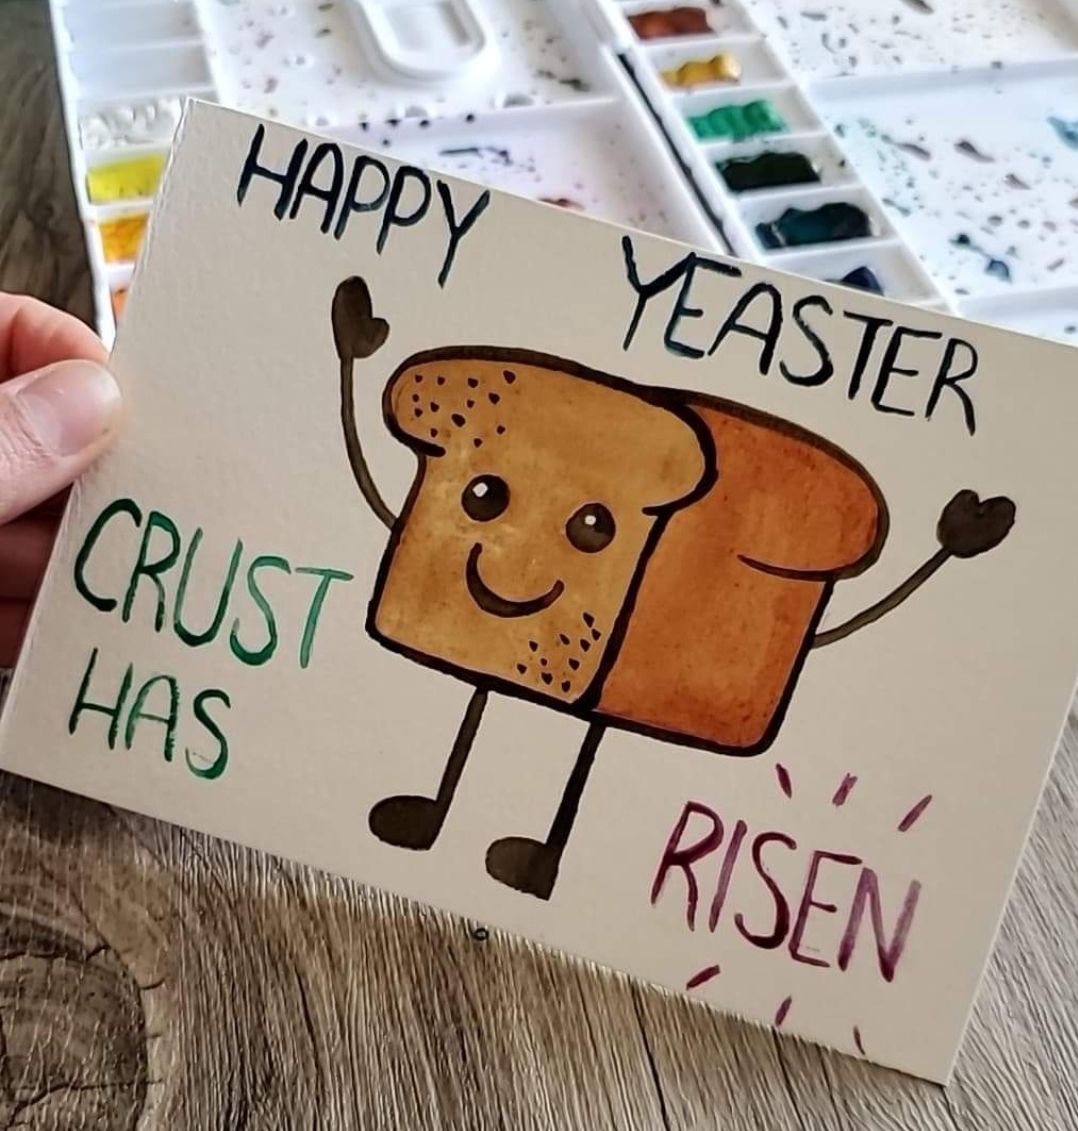 My sister's Easter card this year